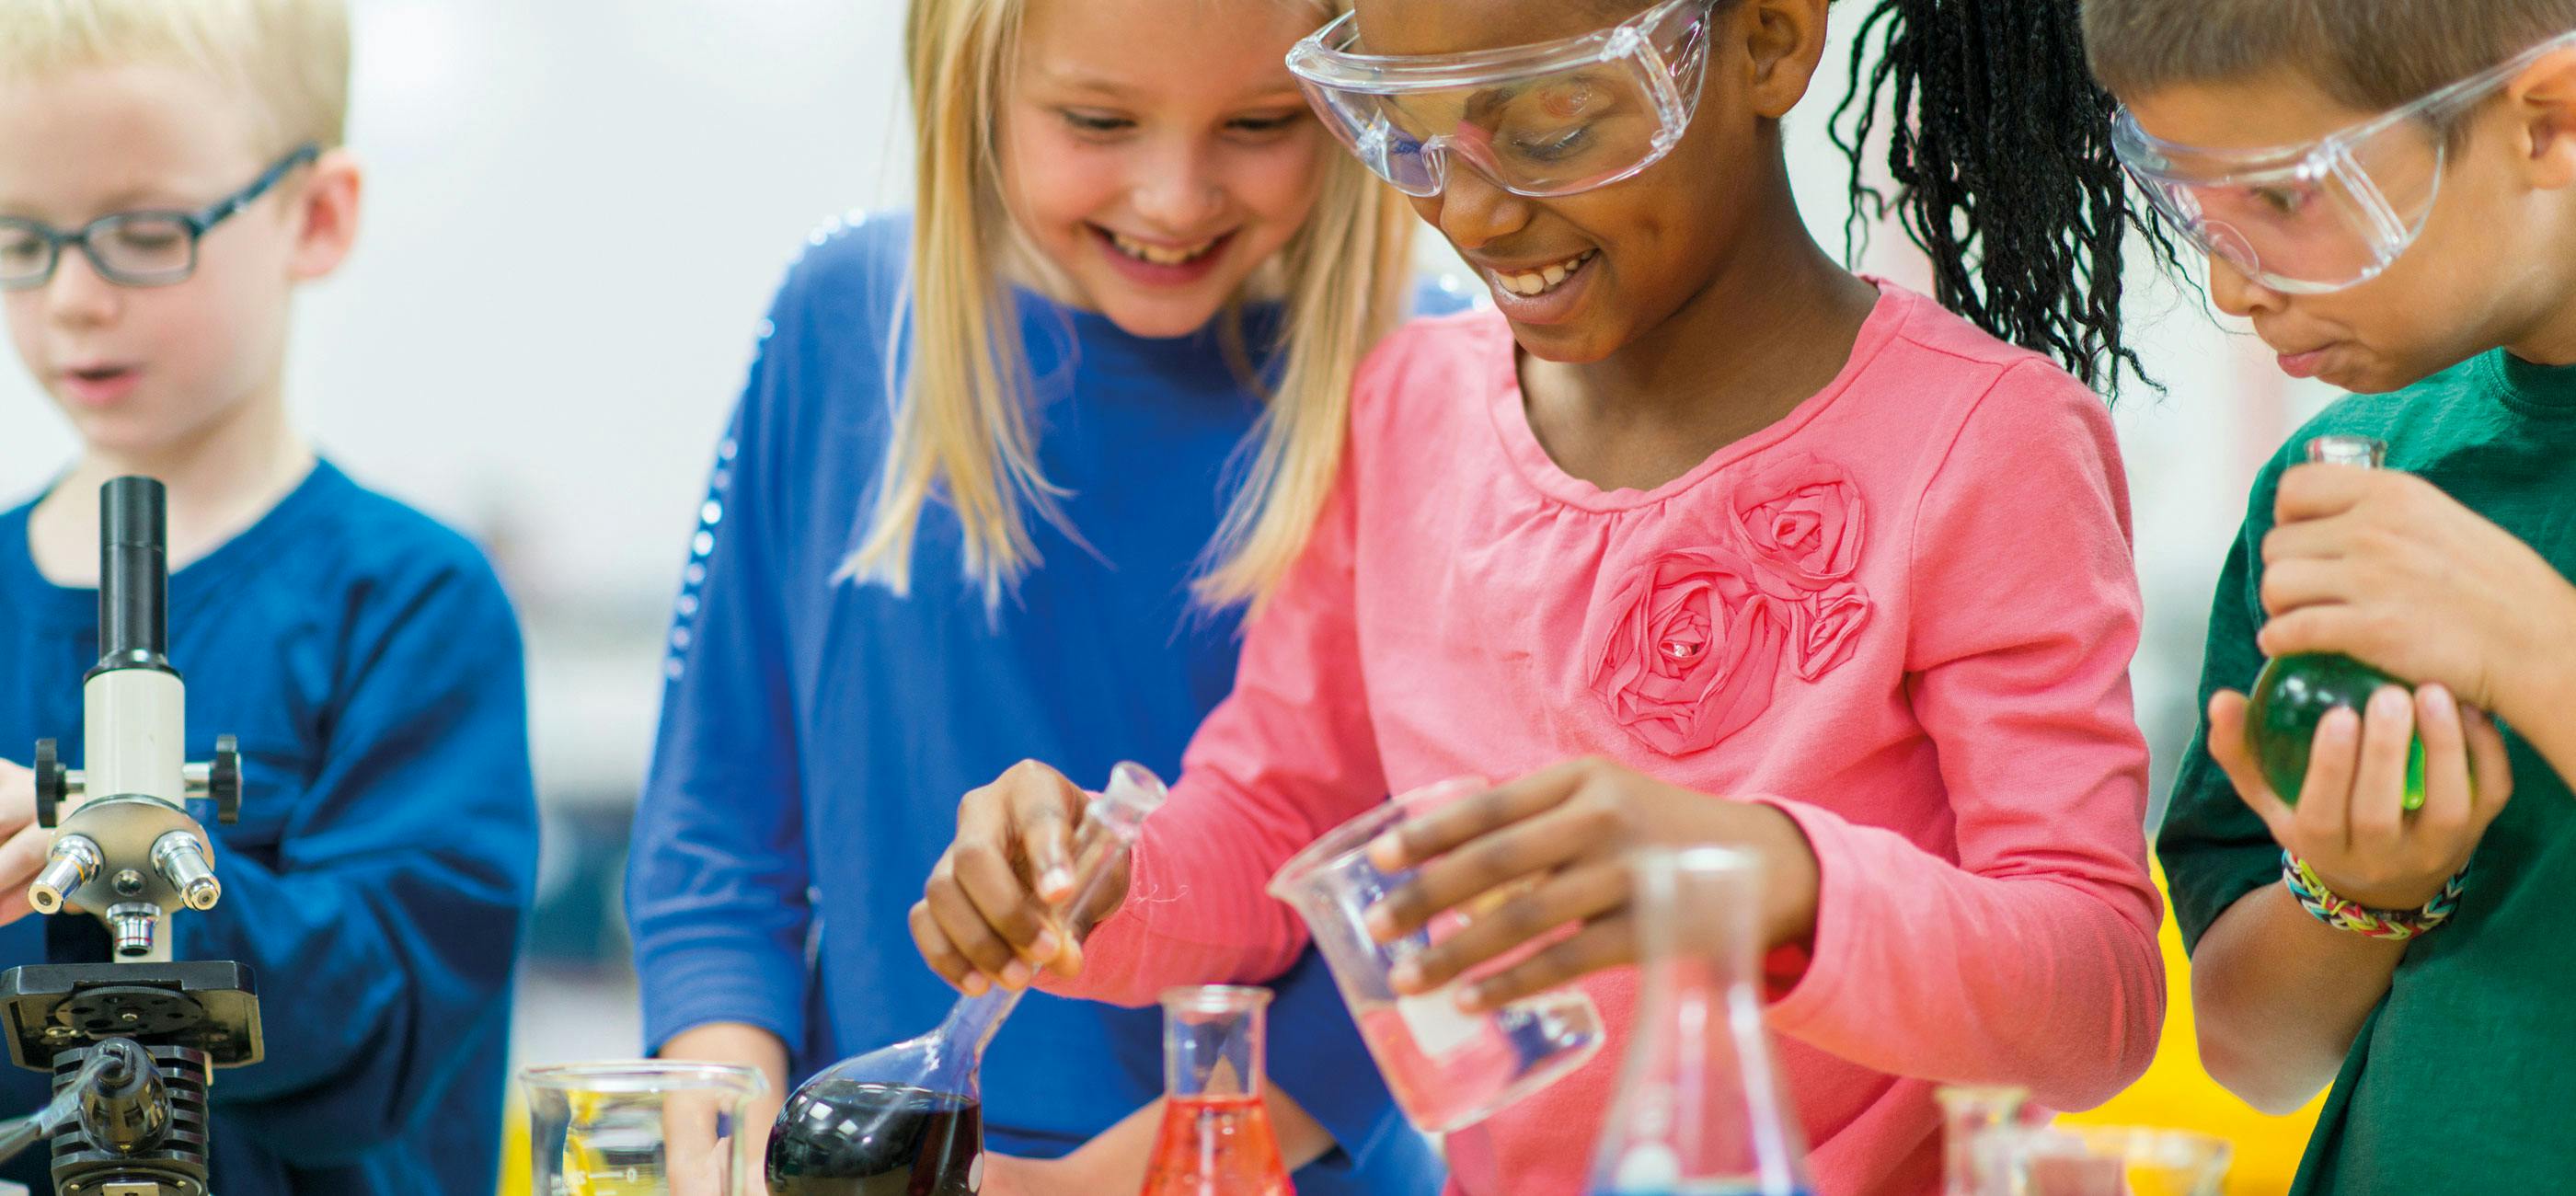 Hands-on science for children